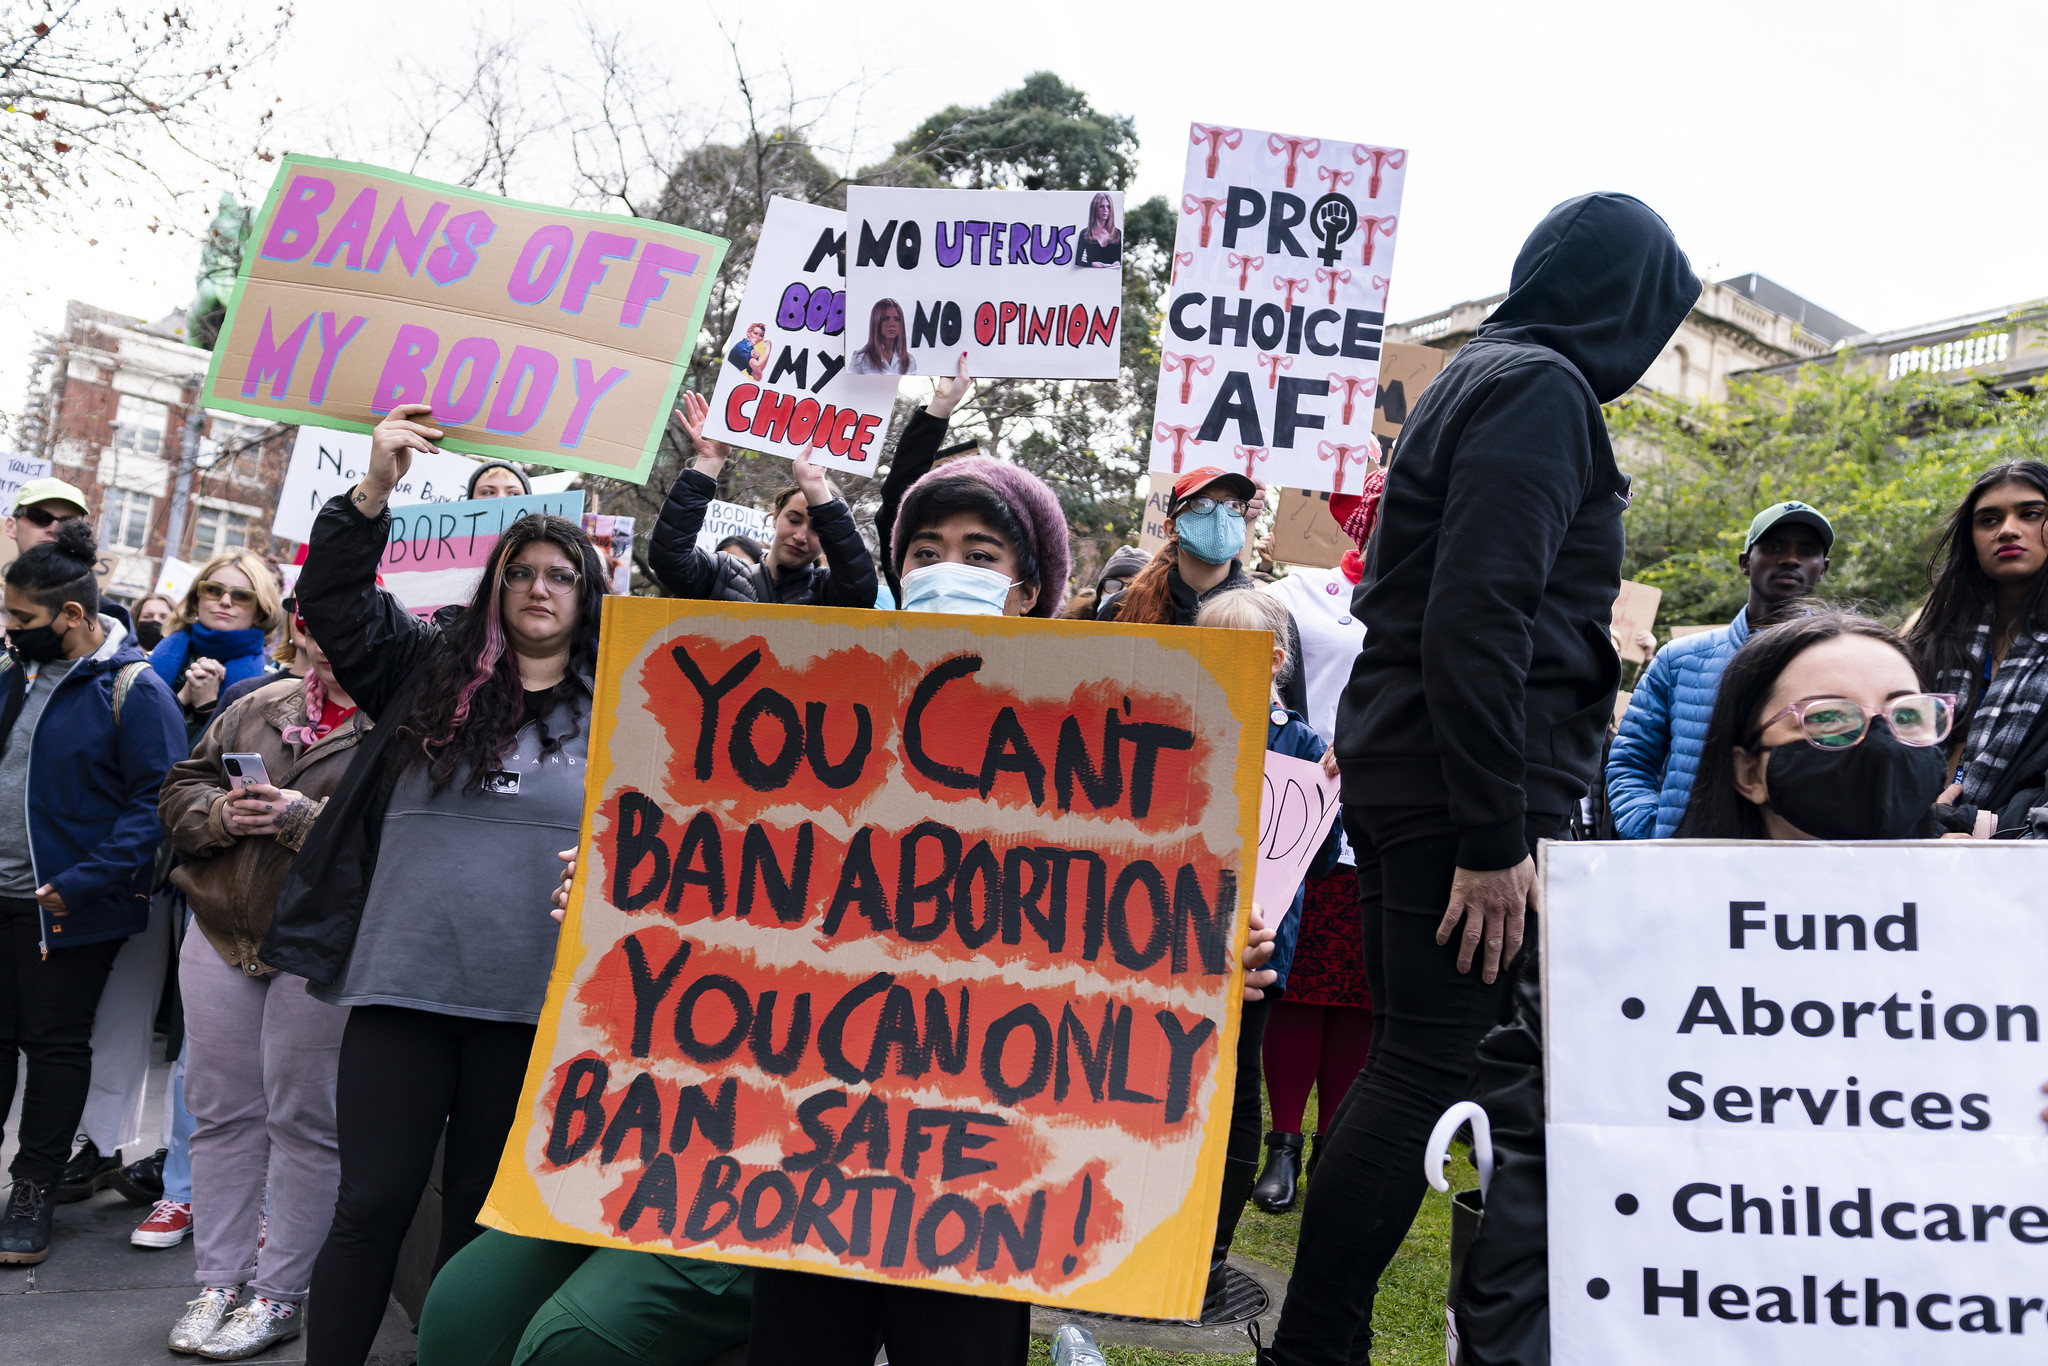 Pro-Choice Demonstration. Prominent sign reads, "You can't ban abortion; you can only ban safe abortion."